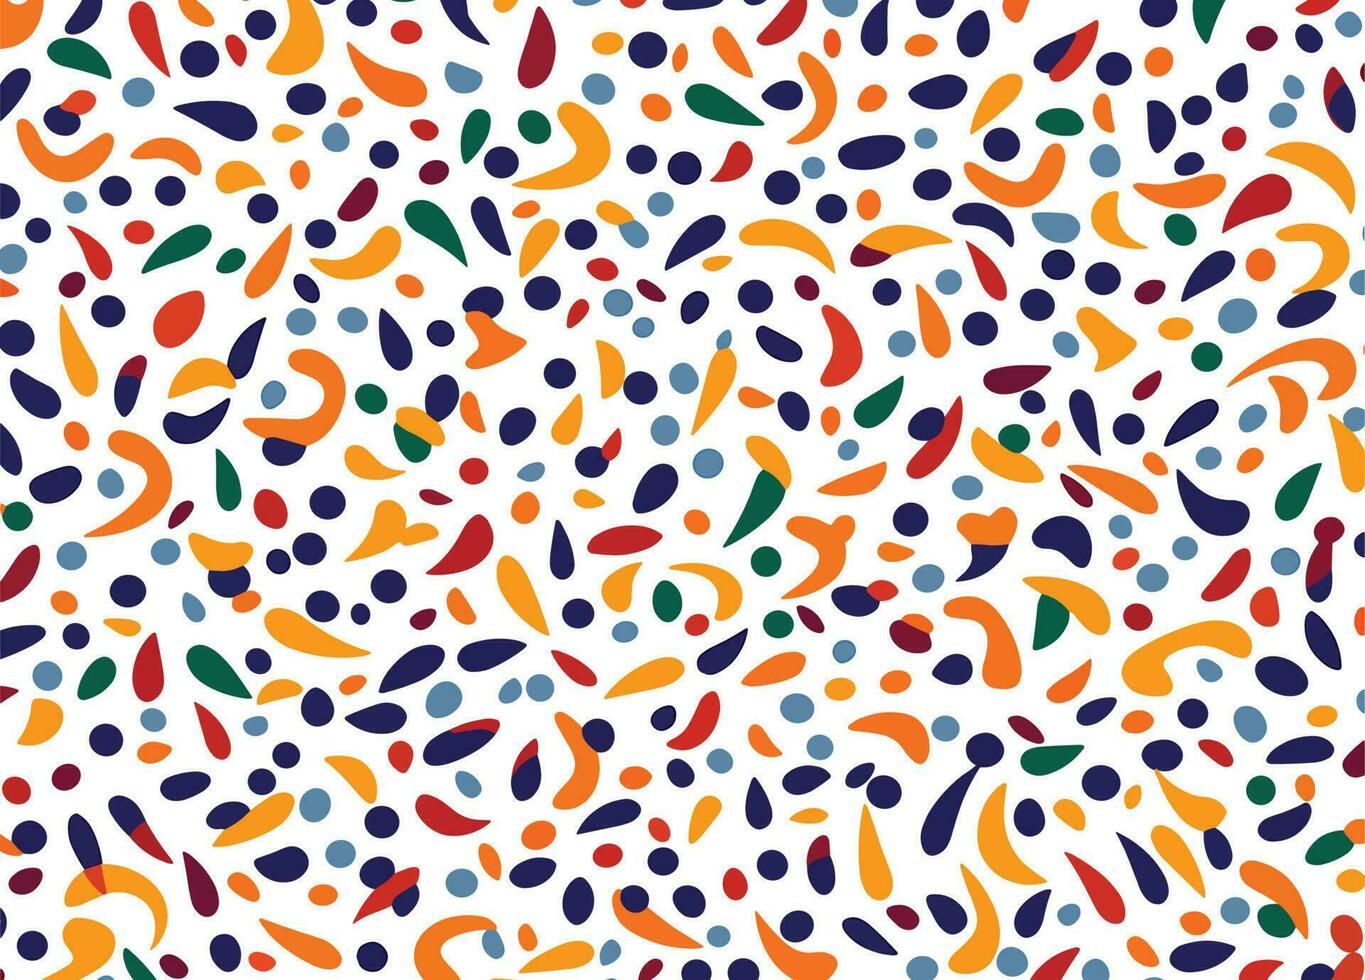 multicolored sprinkles seamless background colorful sprinkles on a white background, in the style of minimalist strokes, geometric shapes patterns, minimalist backgrounds, graffiti-inspired vector